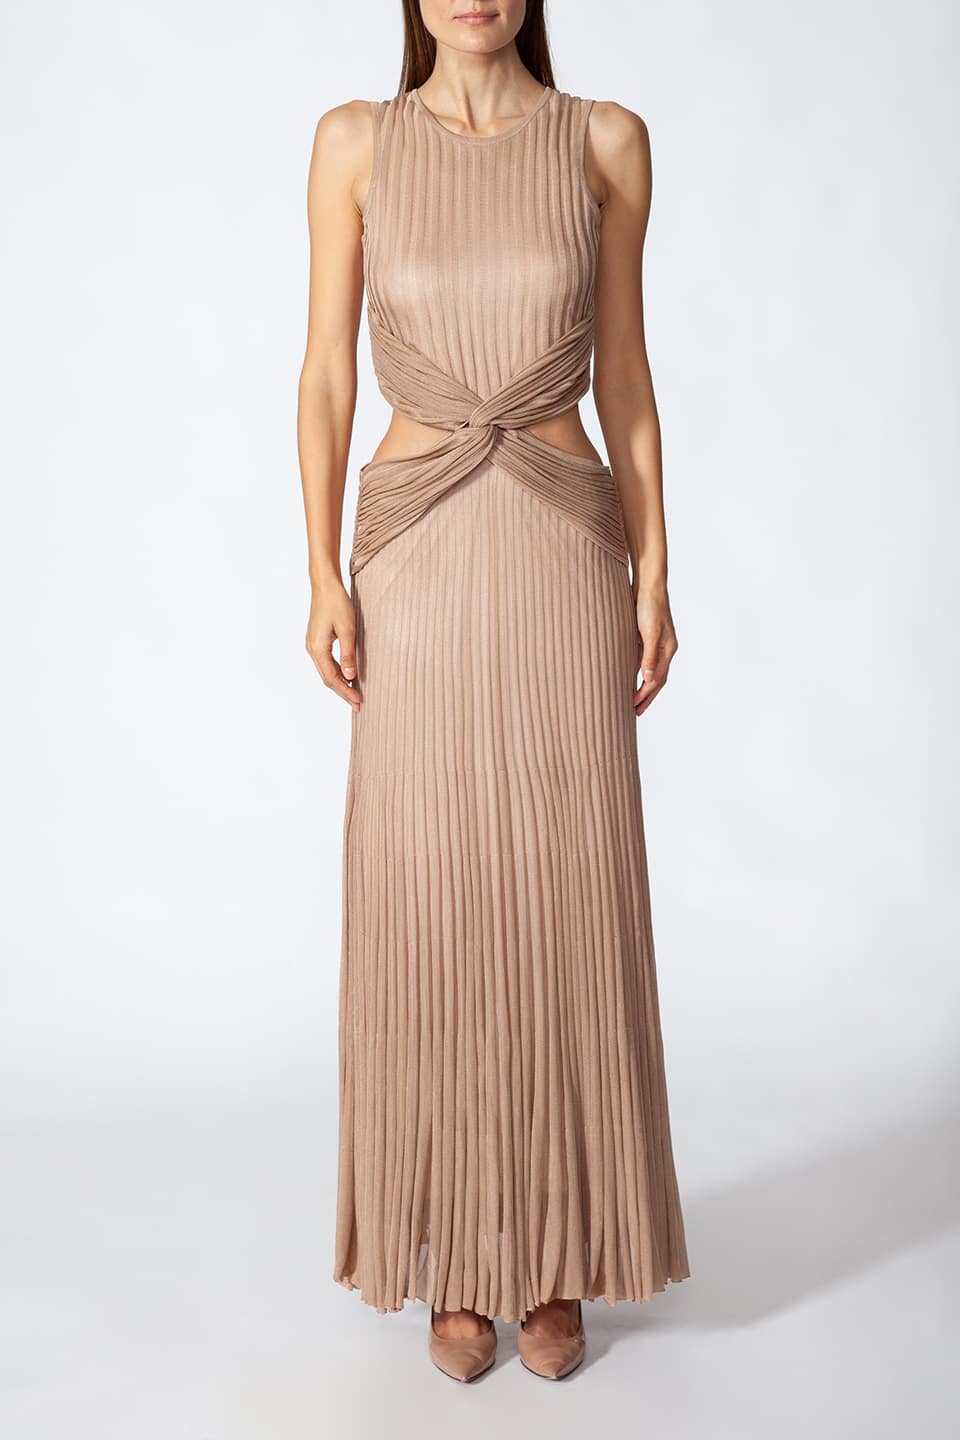 Model in frontal pose wearing Fashion Stylist Kukhareva London's elegant gold dress. Long evening dress crafted from gold viscose blend featuring round neckline.. Product gallery 1